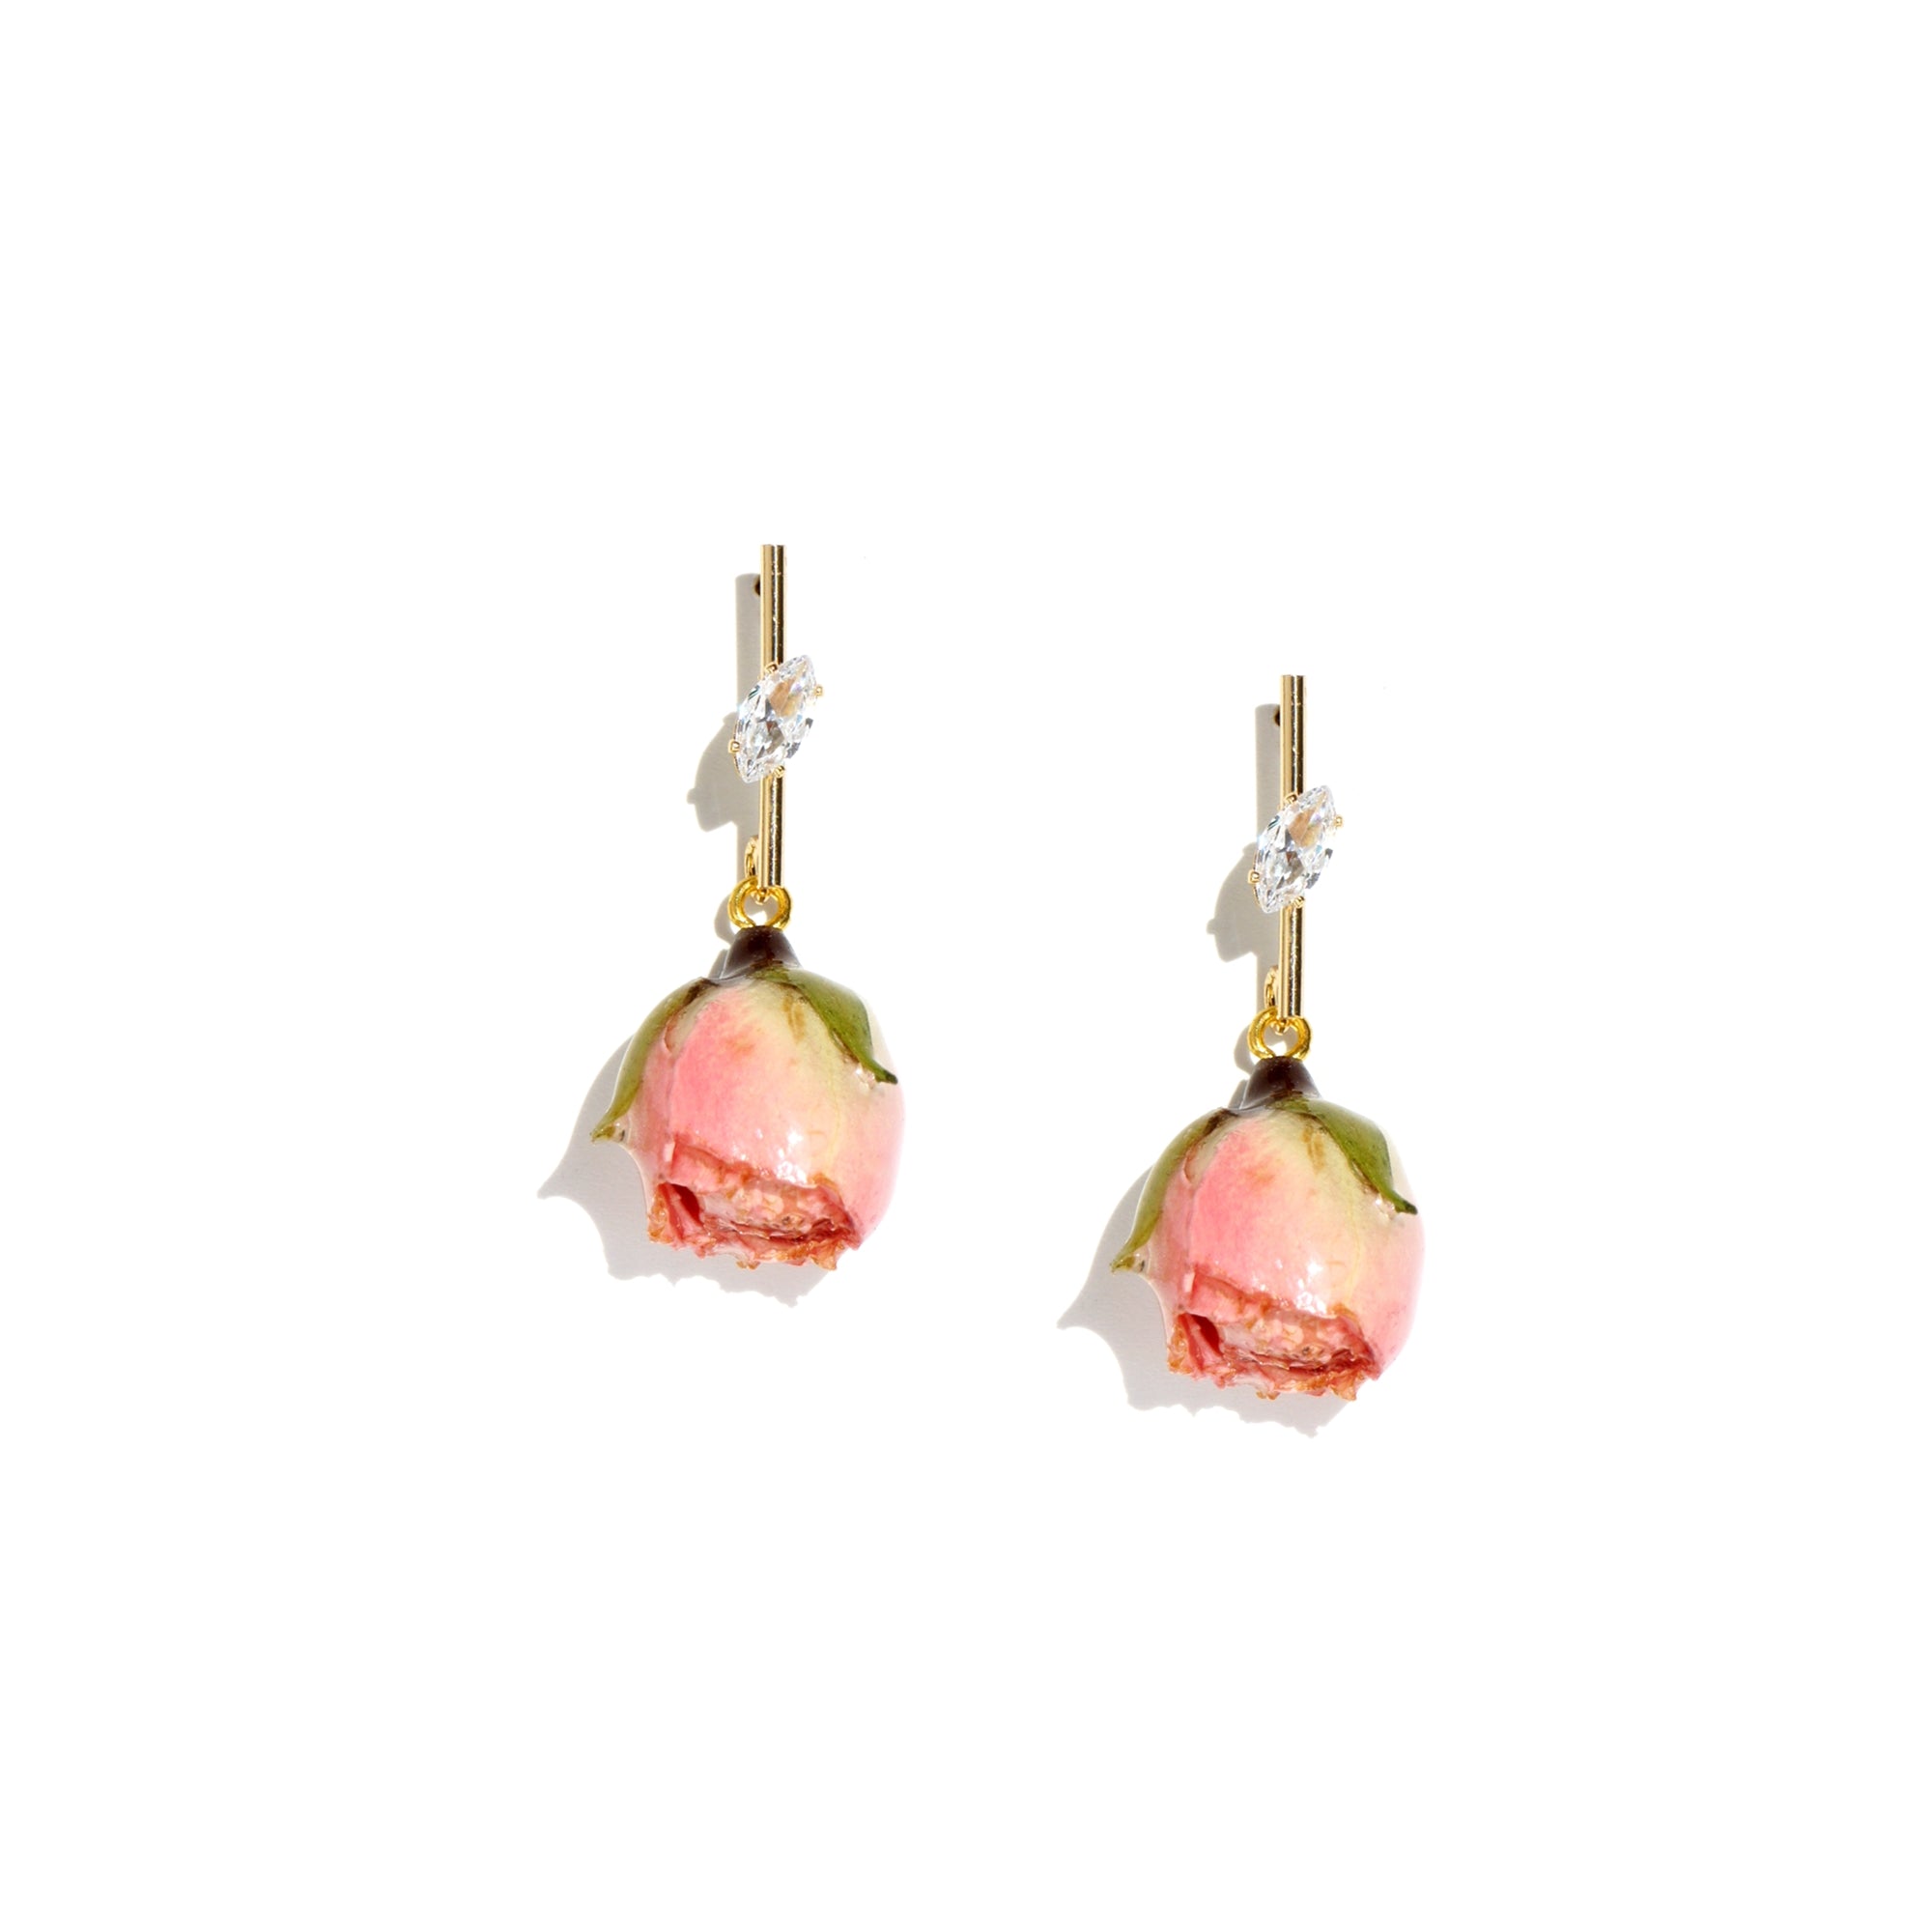 *REAL FLOWER* Rosa Brillante Rosebud Drop Earrings with Golden Stem and Crystal